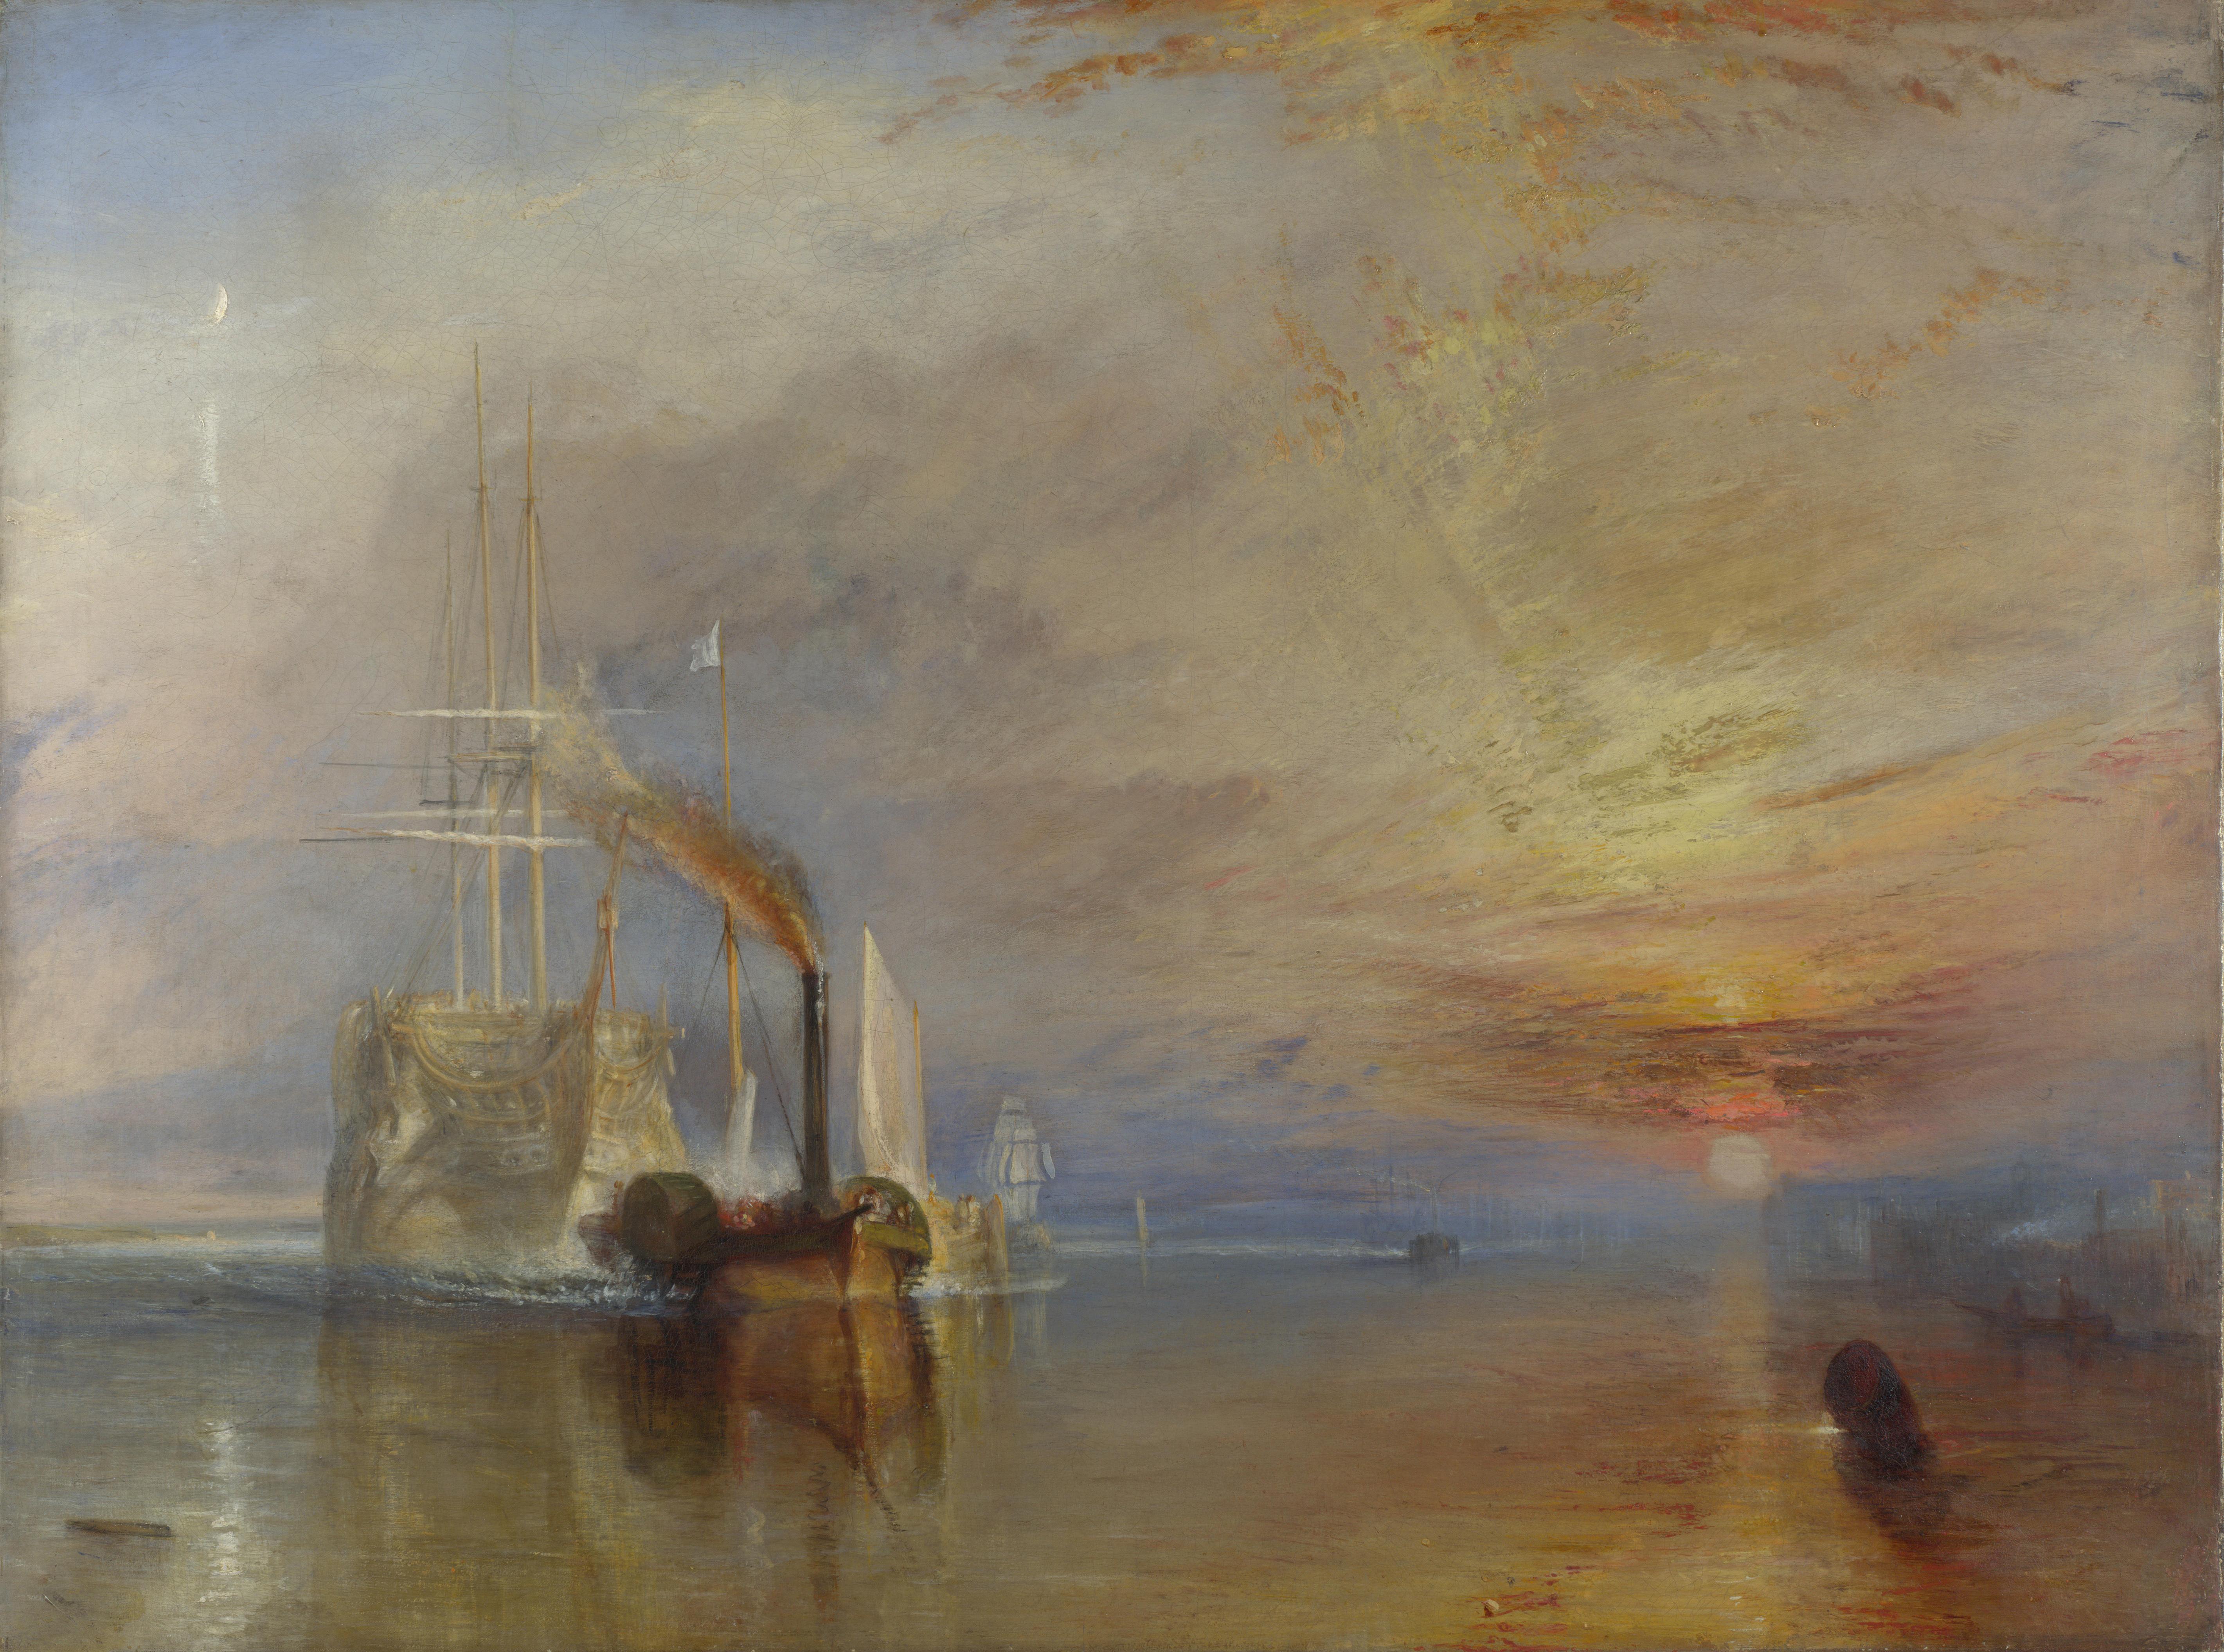 The Fighting Temeraire, JMW Turner, National